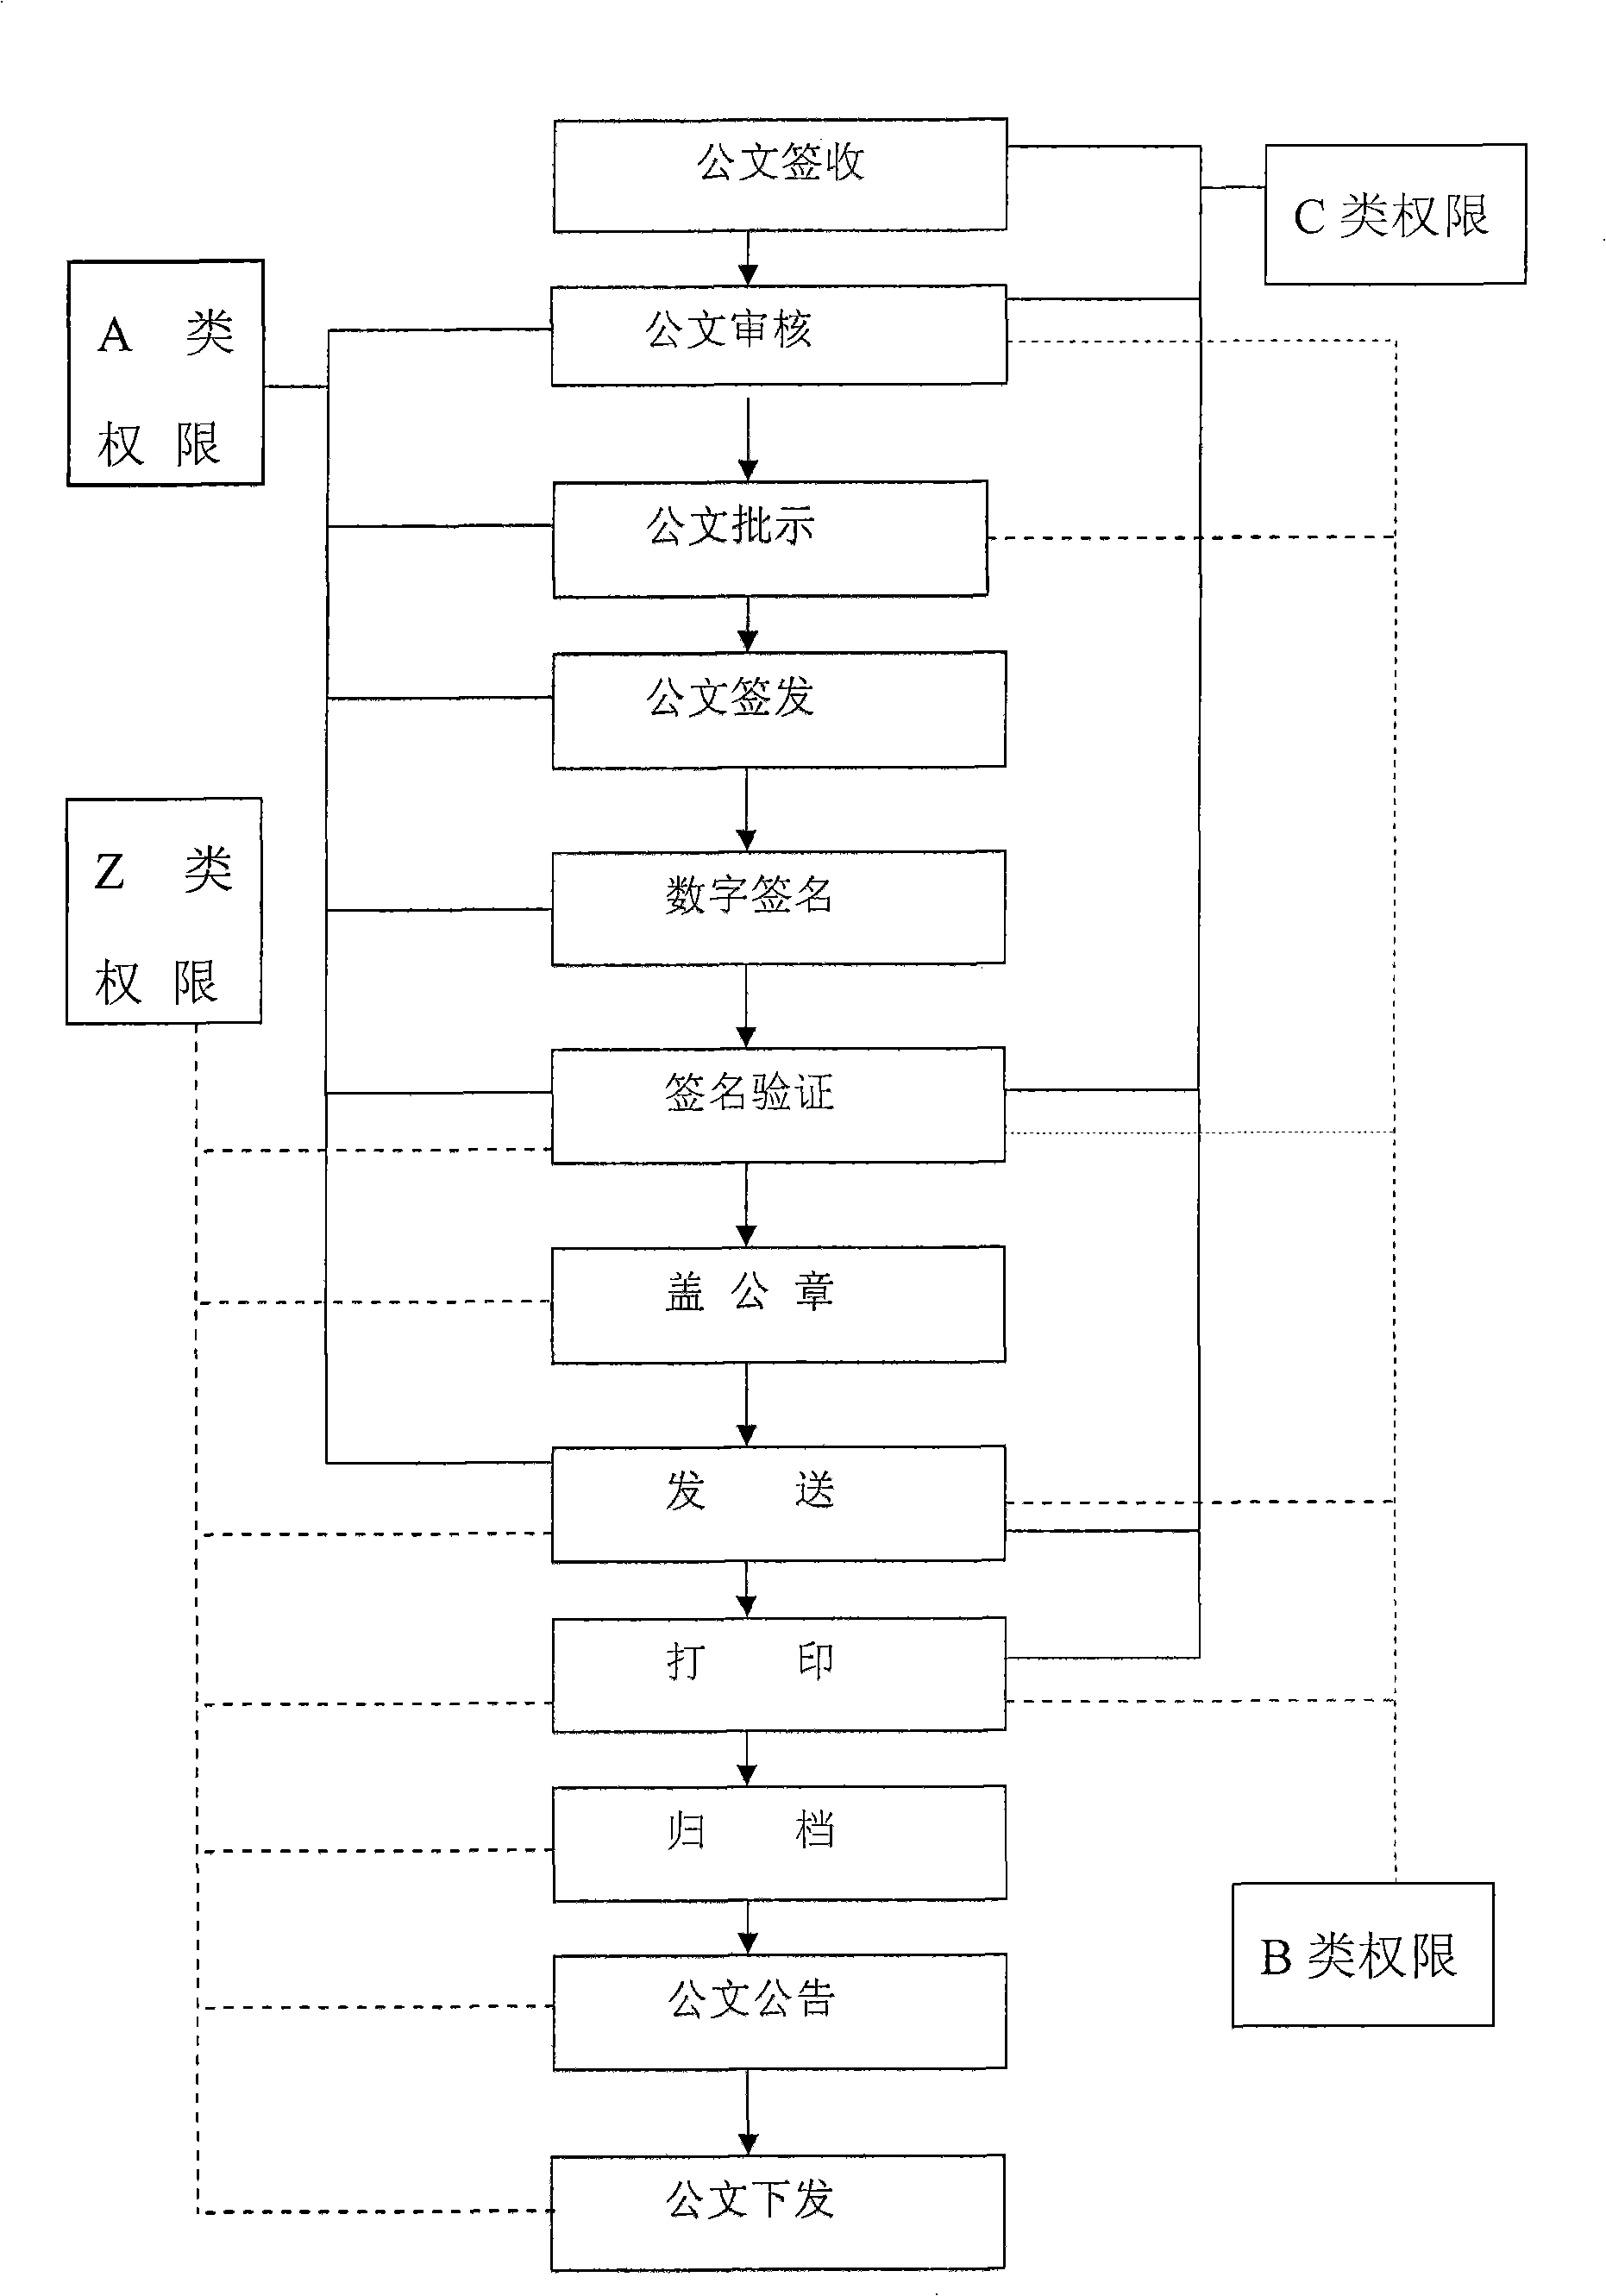 Method for implementing dynamic flow path used for office automation official document circulation